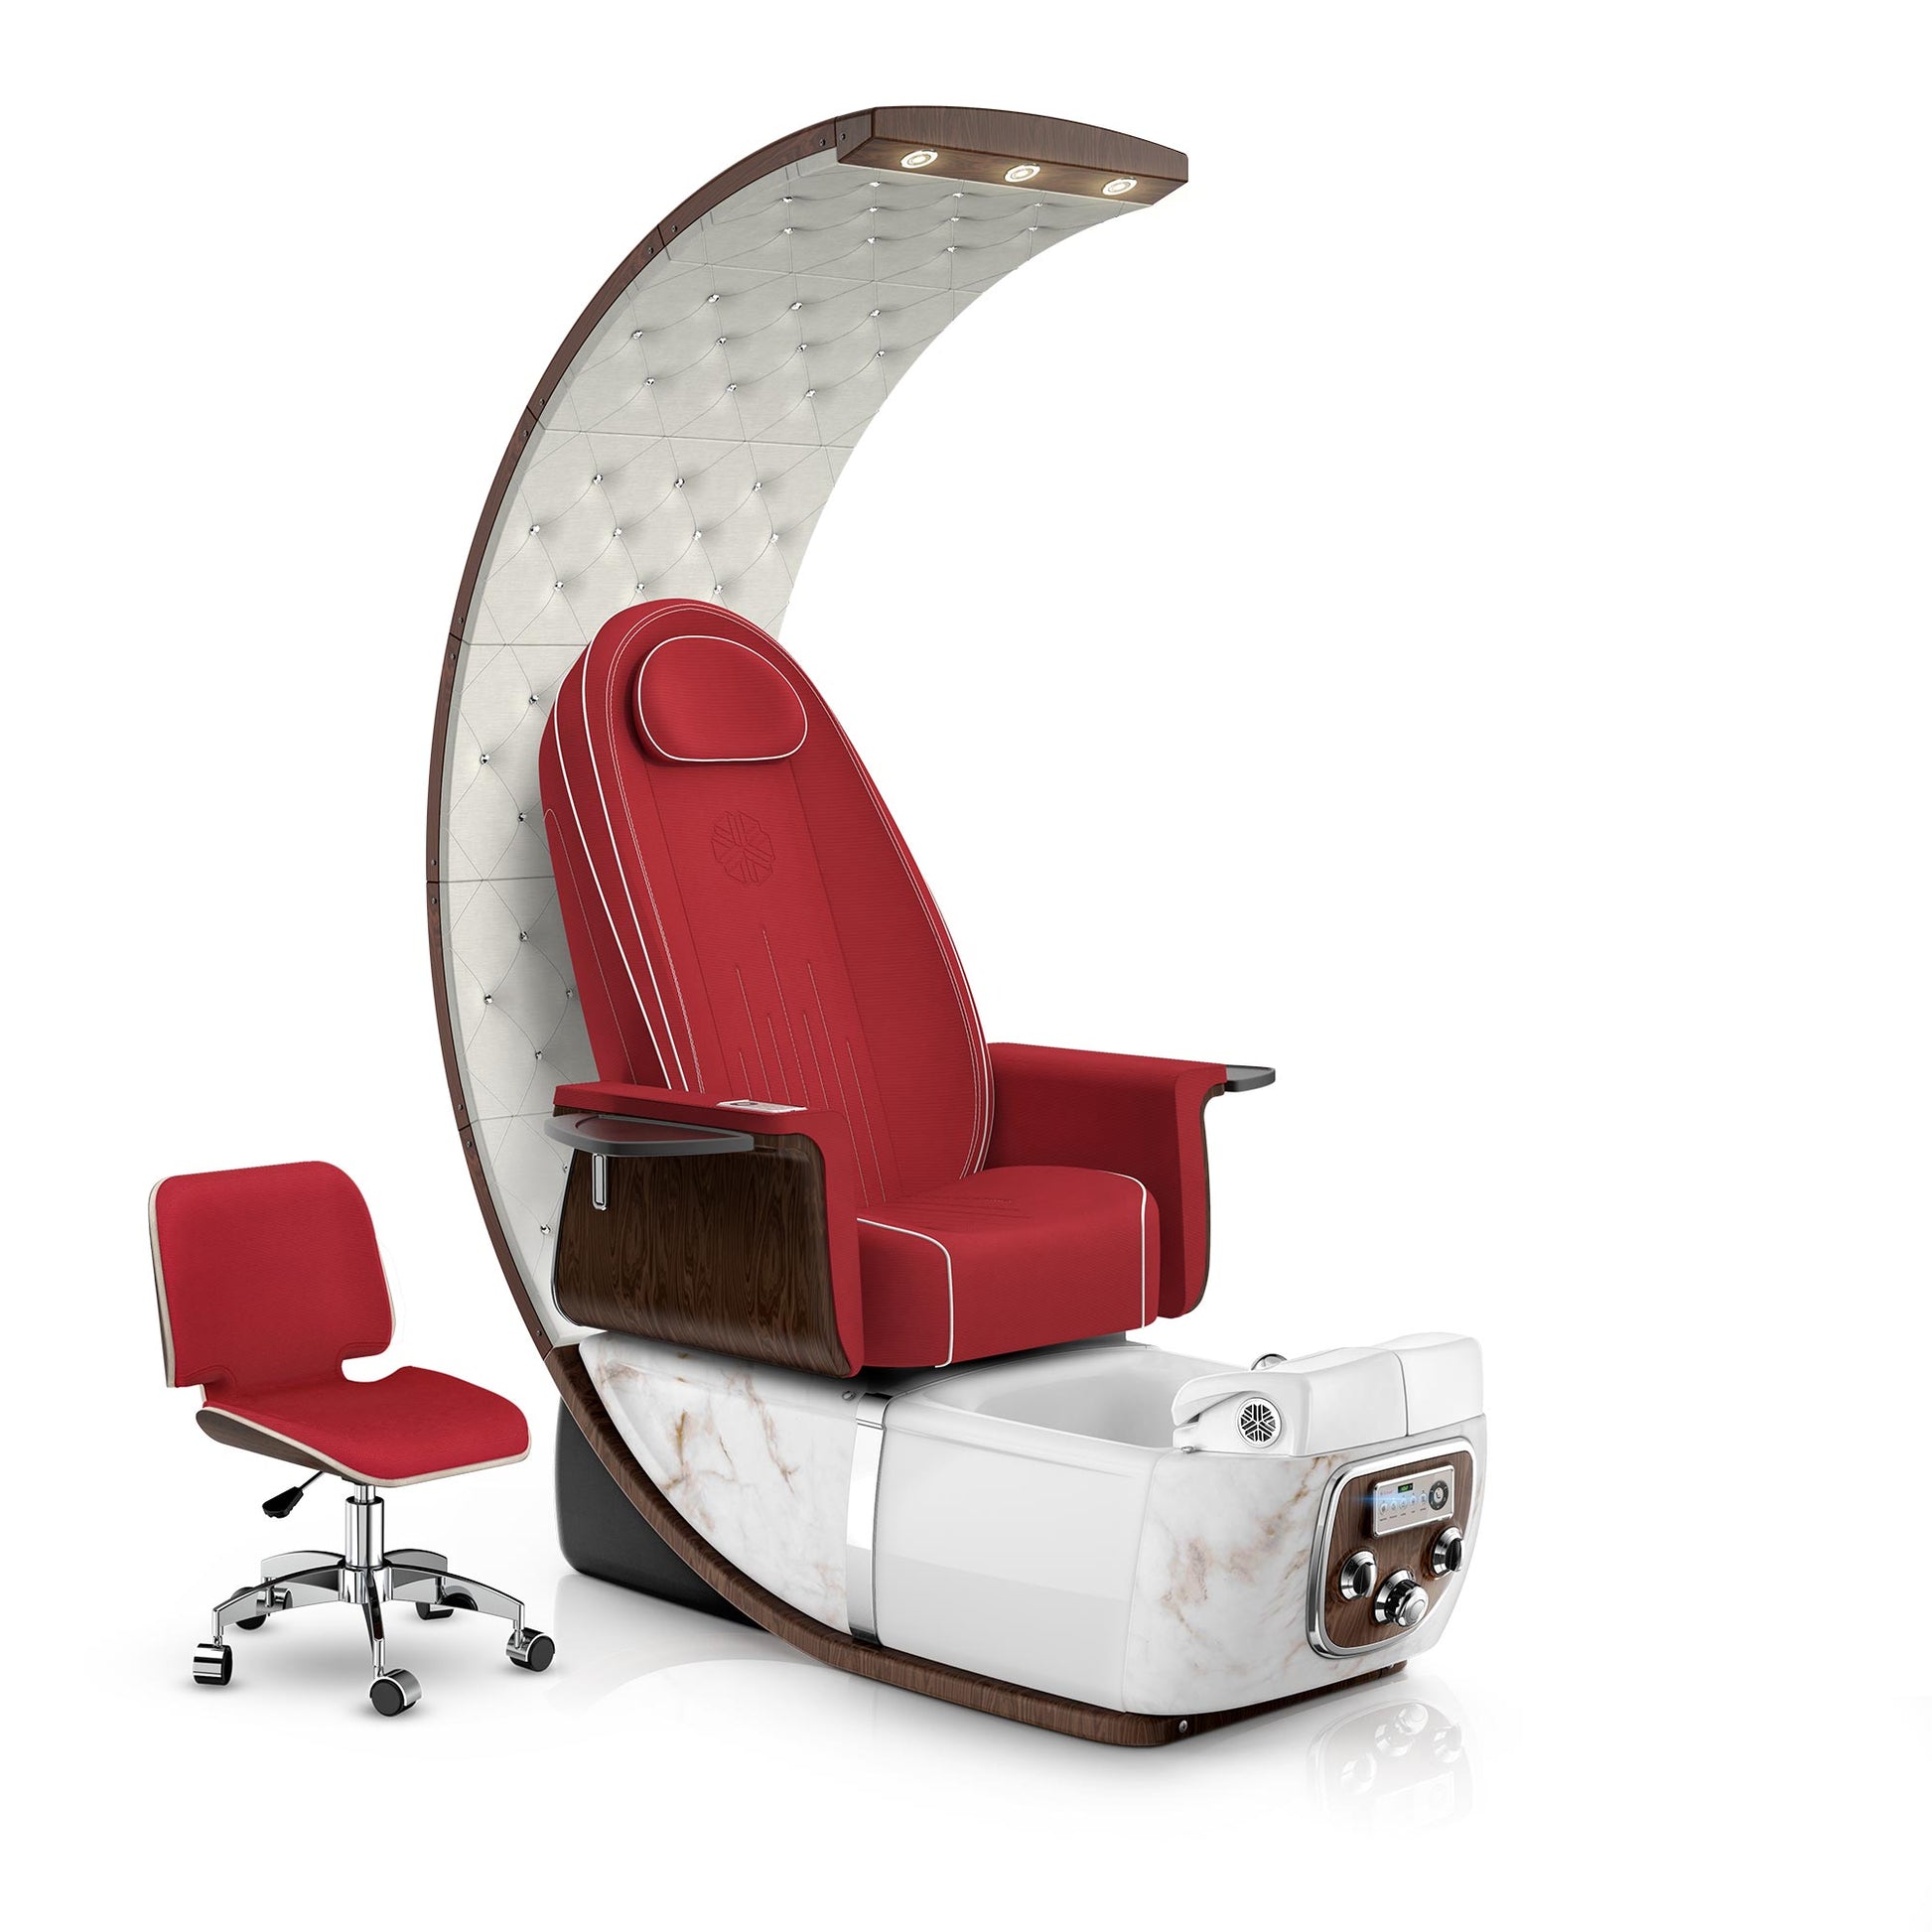 Lexor PRIVÉ Lounge pedicure chair with scarlet cushion and white moonstone spa base